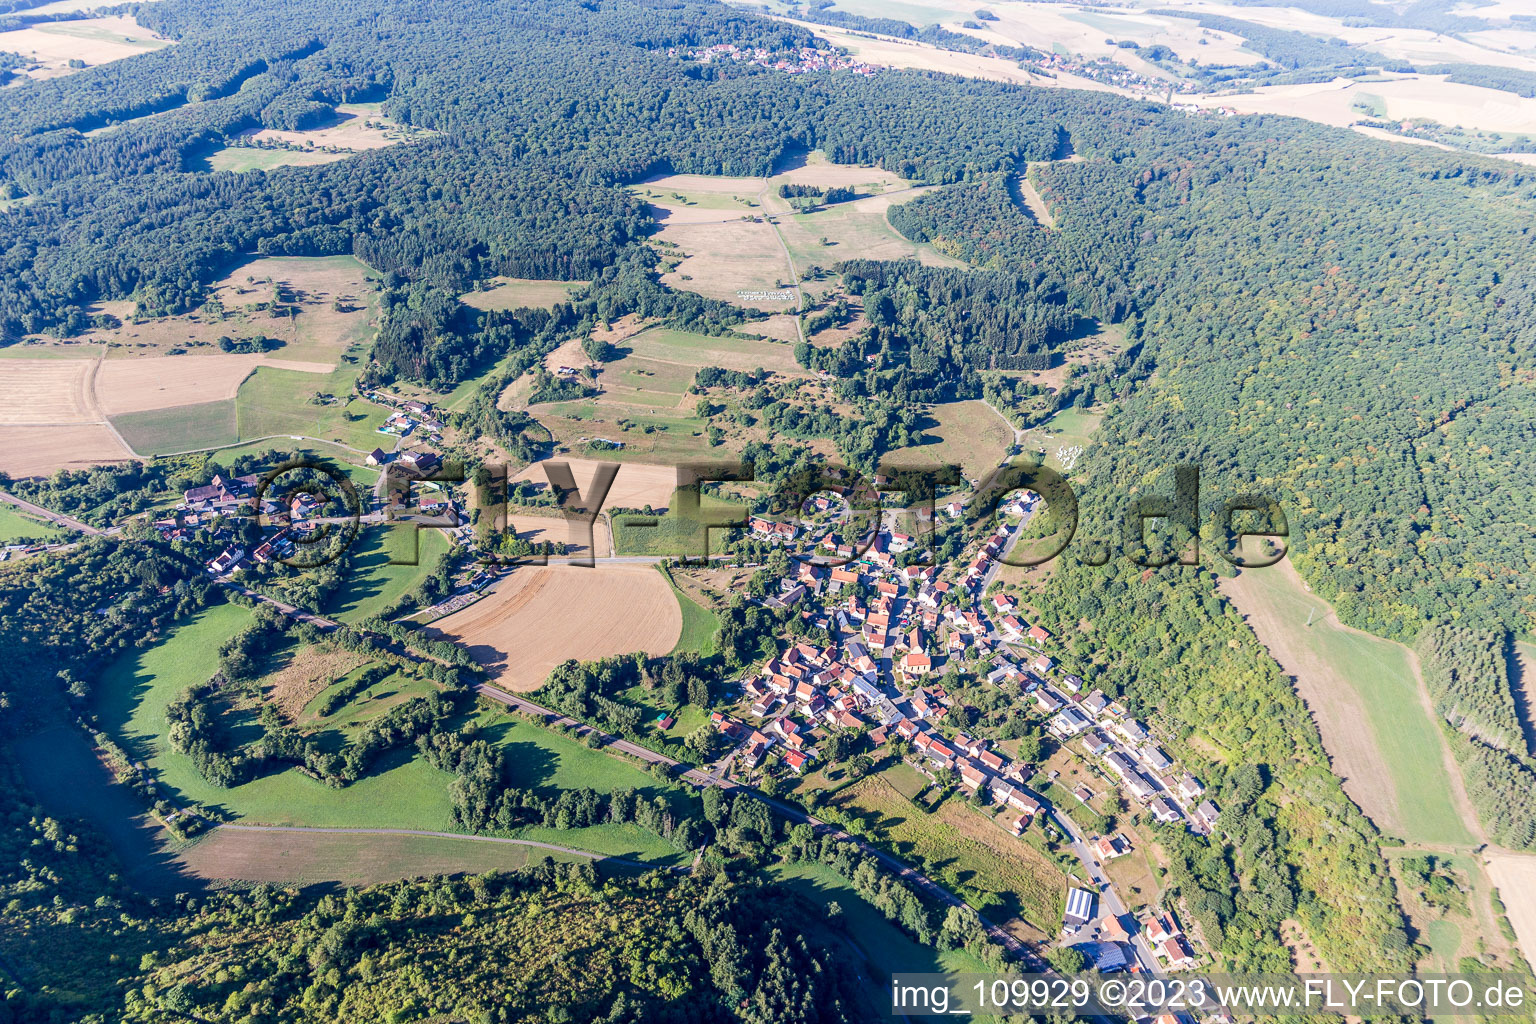 Mannweiler-Cölln in the state Rhineland-Palatinate, Germany seen from above